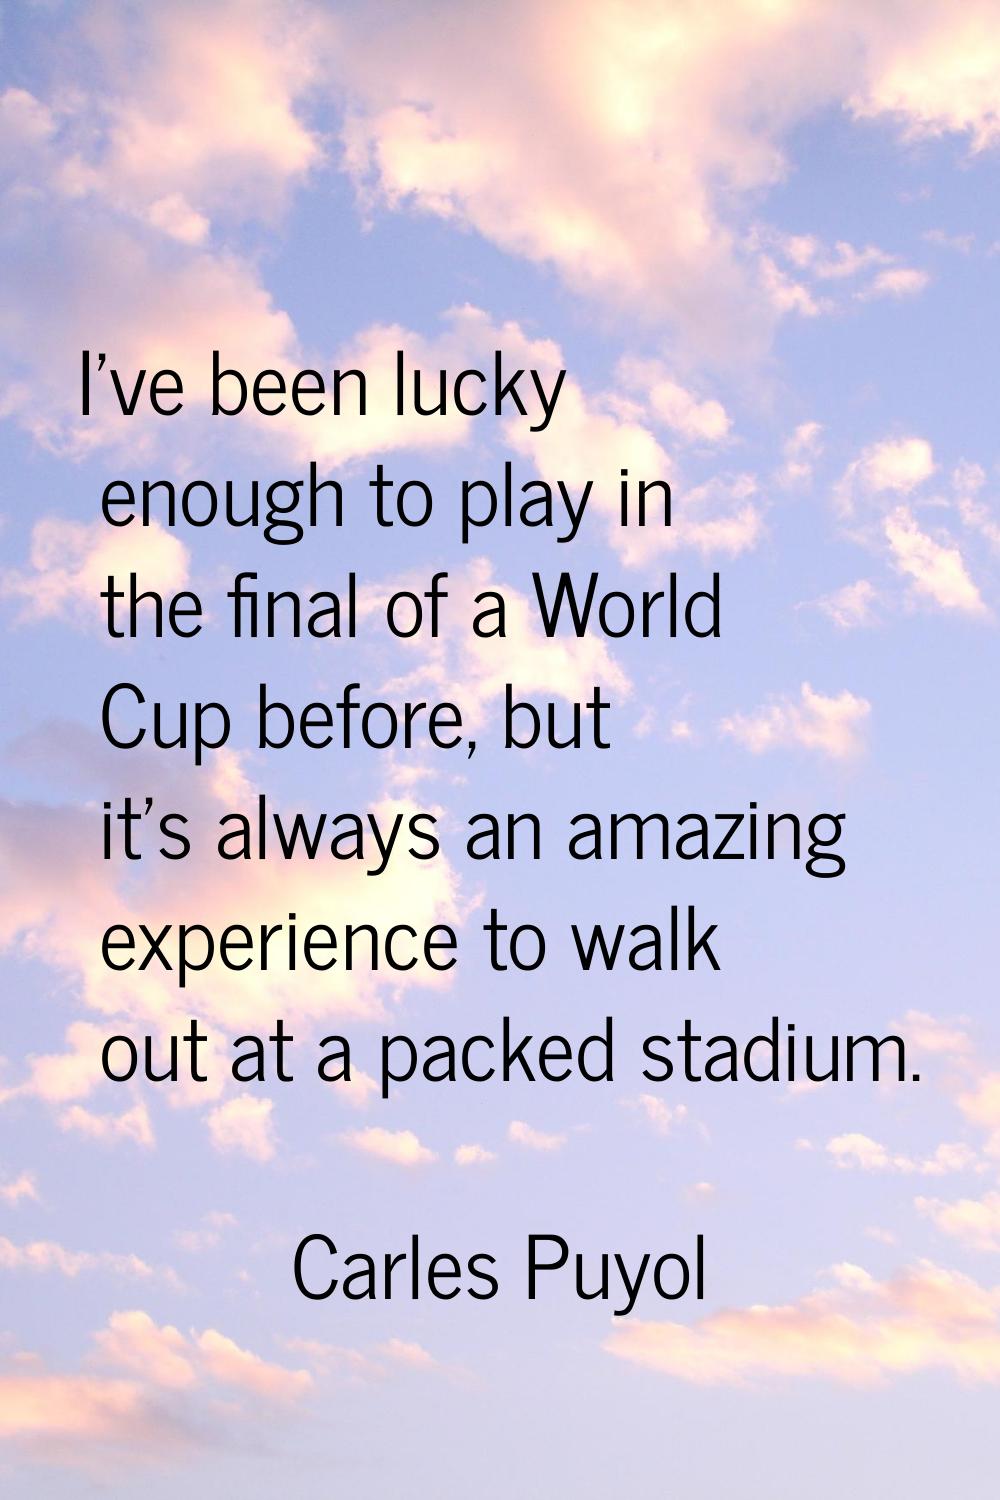 I've been lucky enough to play in the final of a World Cup before, but it's always an amazing exper